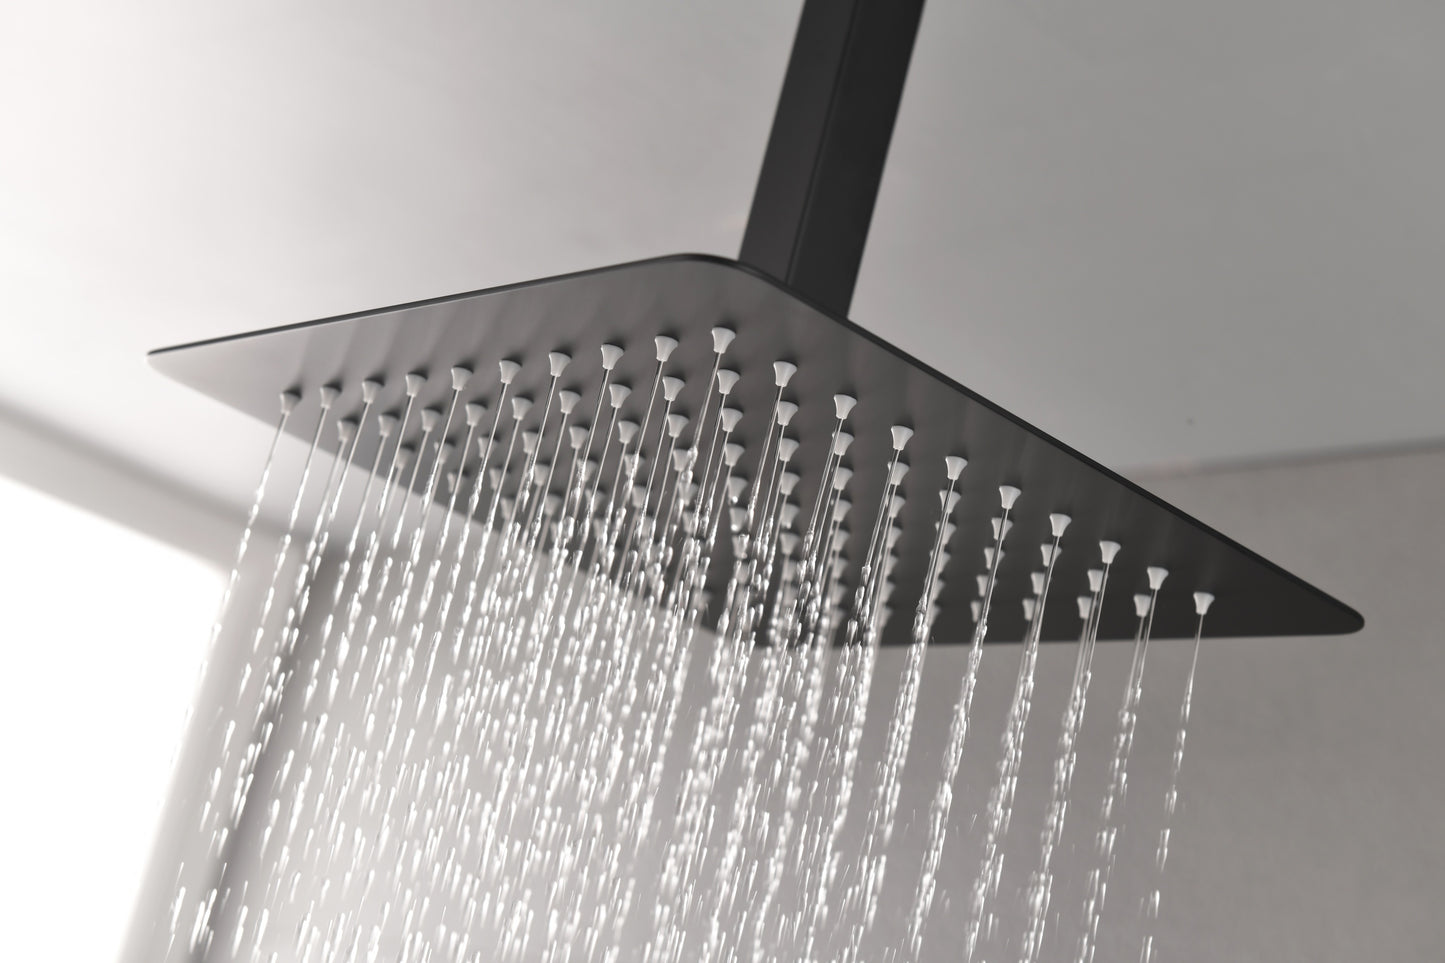 SHOWER Shower Head With Shower Arm,  Ceiling Mount Square Shower Head, Stainless Steel Ceiling Rainfall Showerhead- Waterfall Full Body Coverage